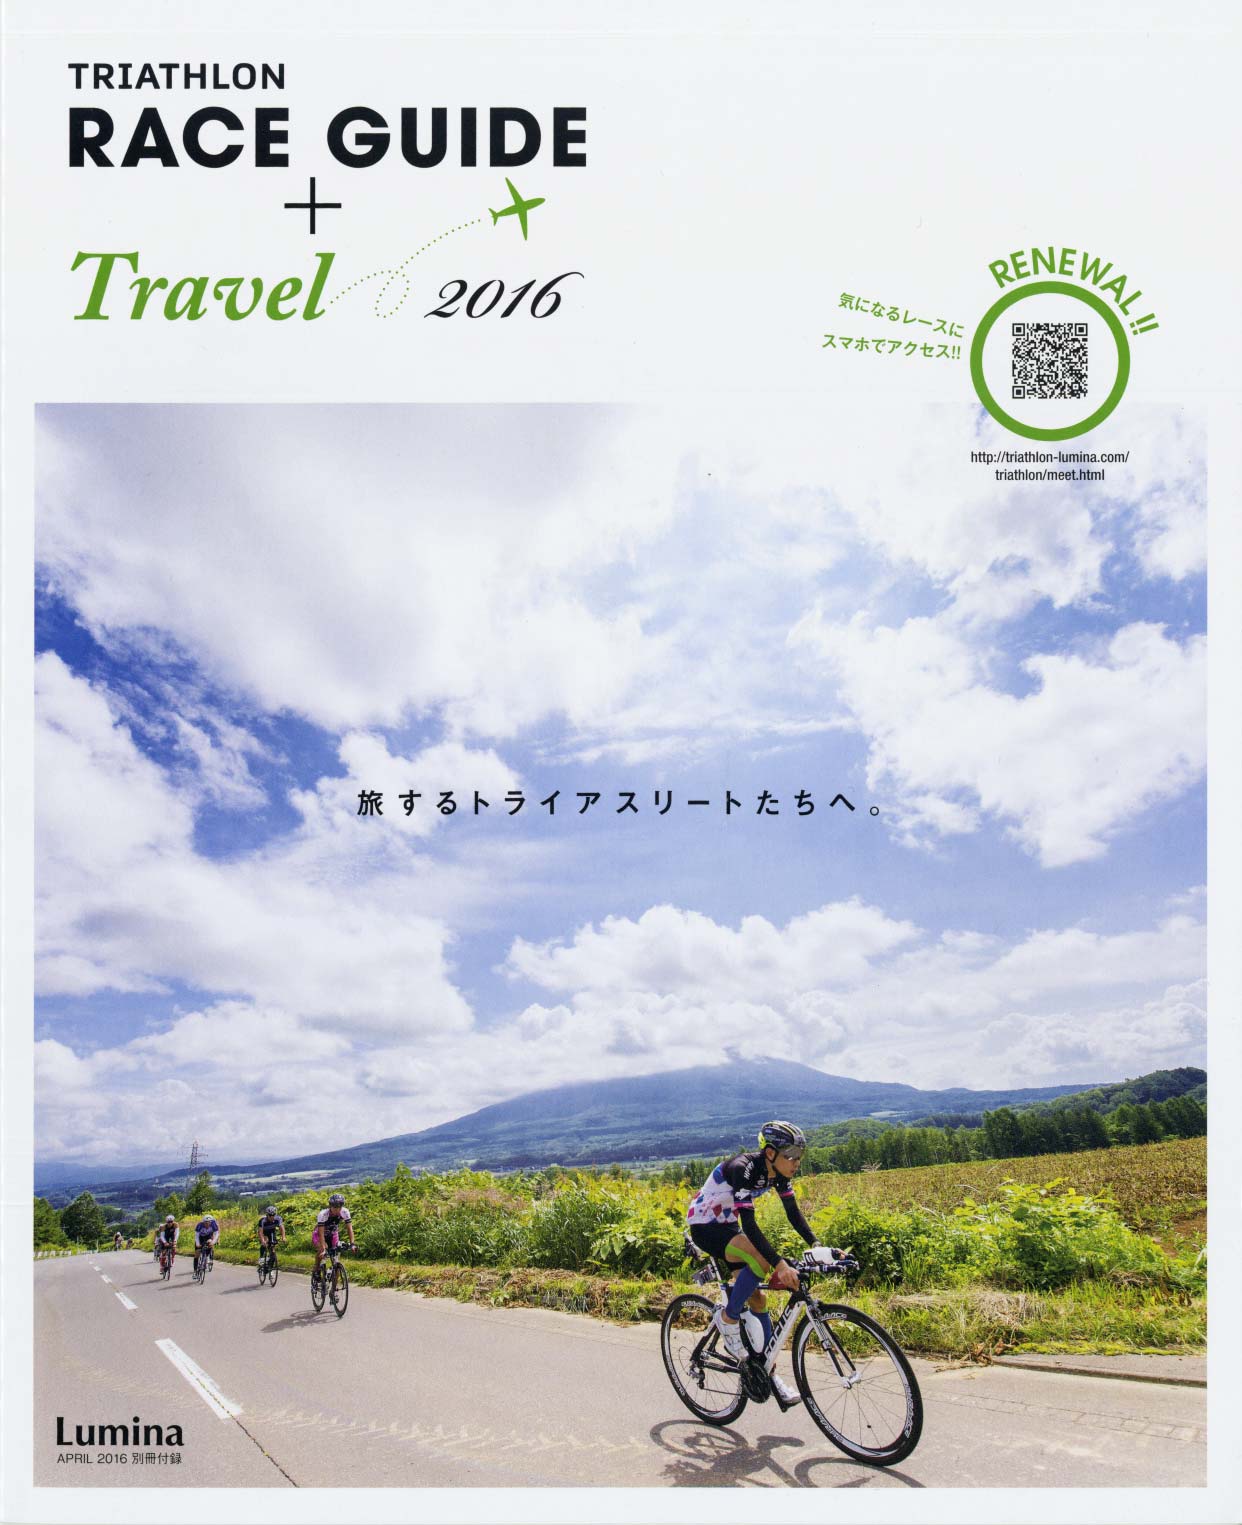 RACE GUIDE+Travel